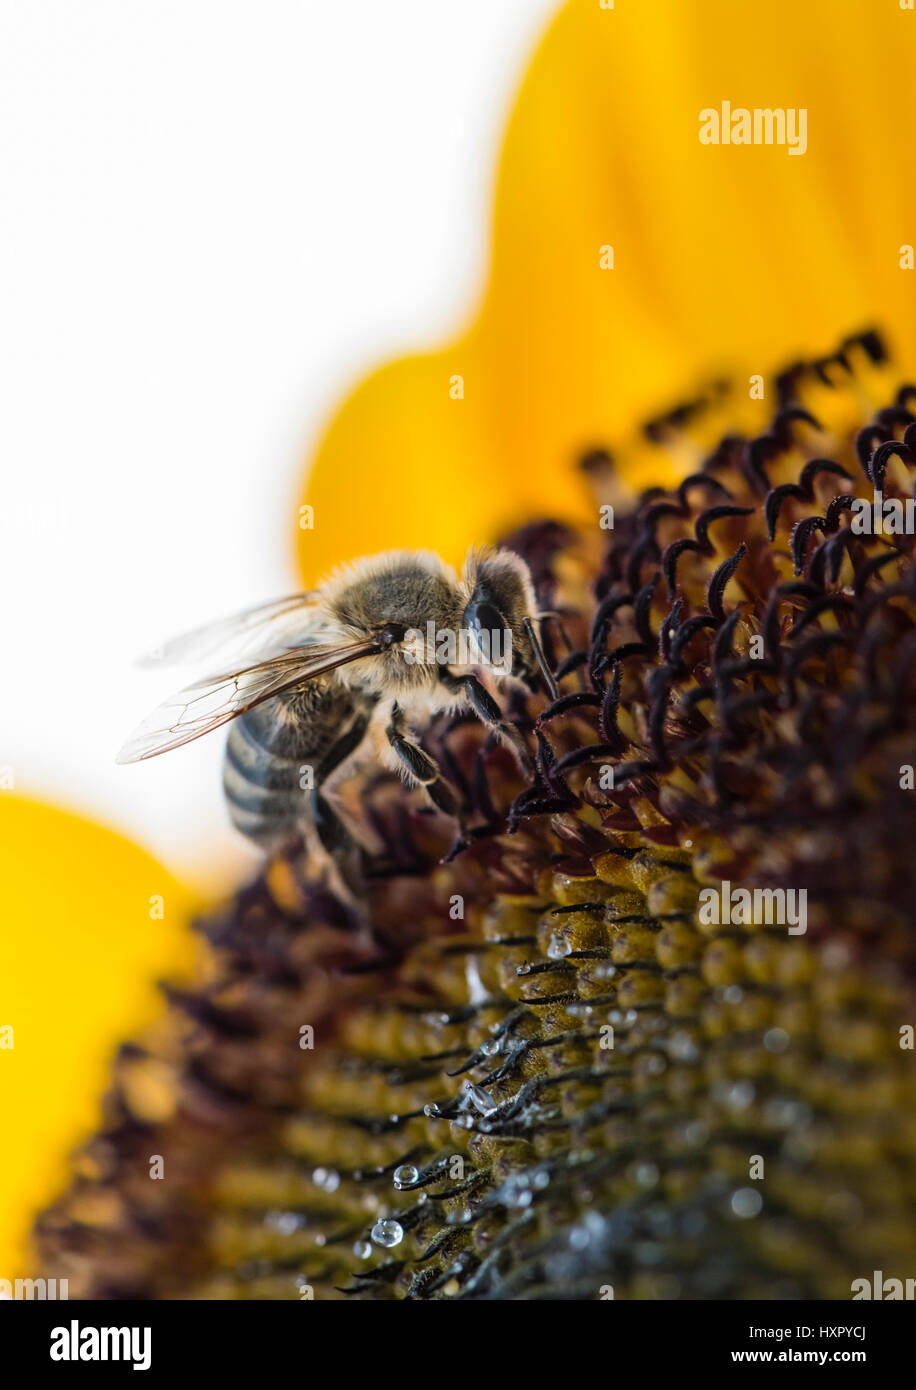 Extreme close-up of bee / honeybee (Apis mellifera) insect collecting pollen of a sunflower Stock Photo